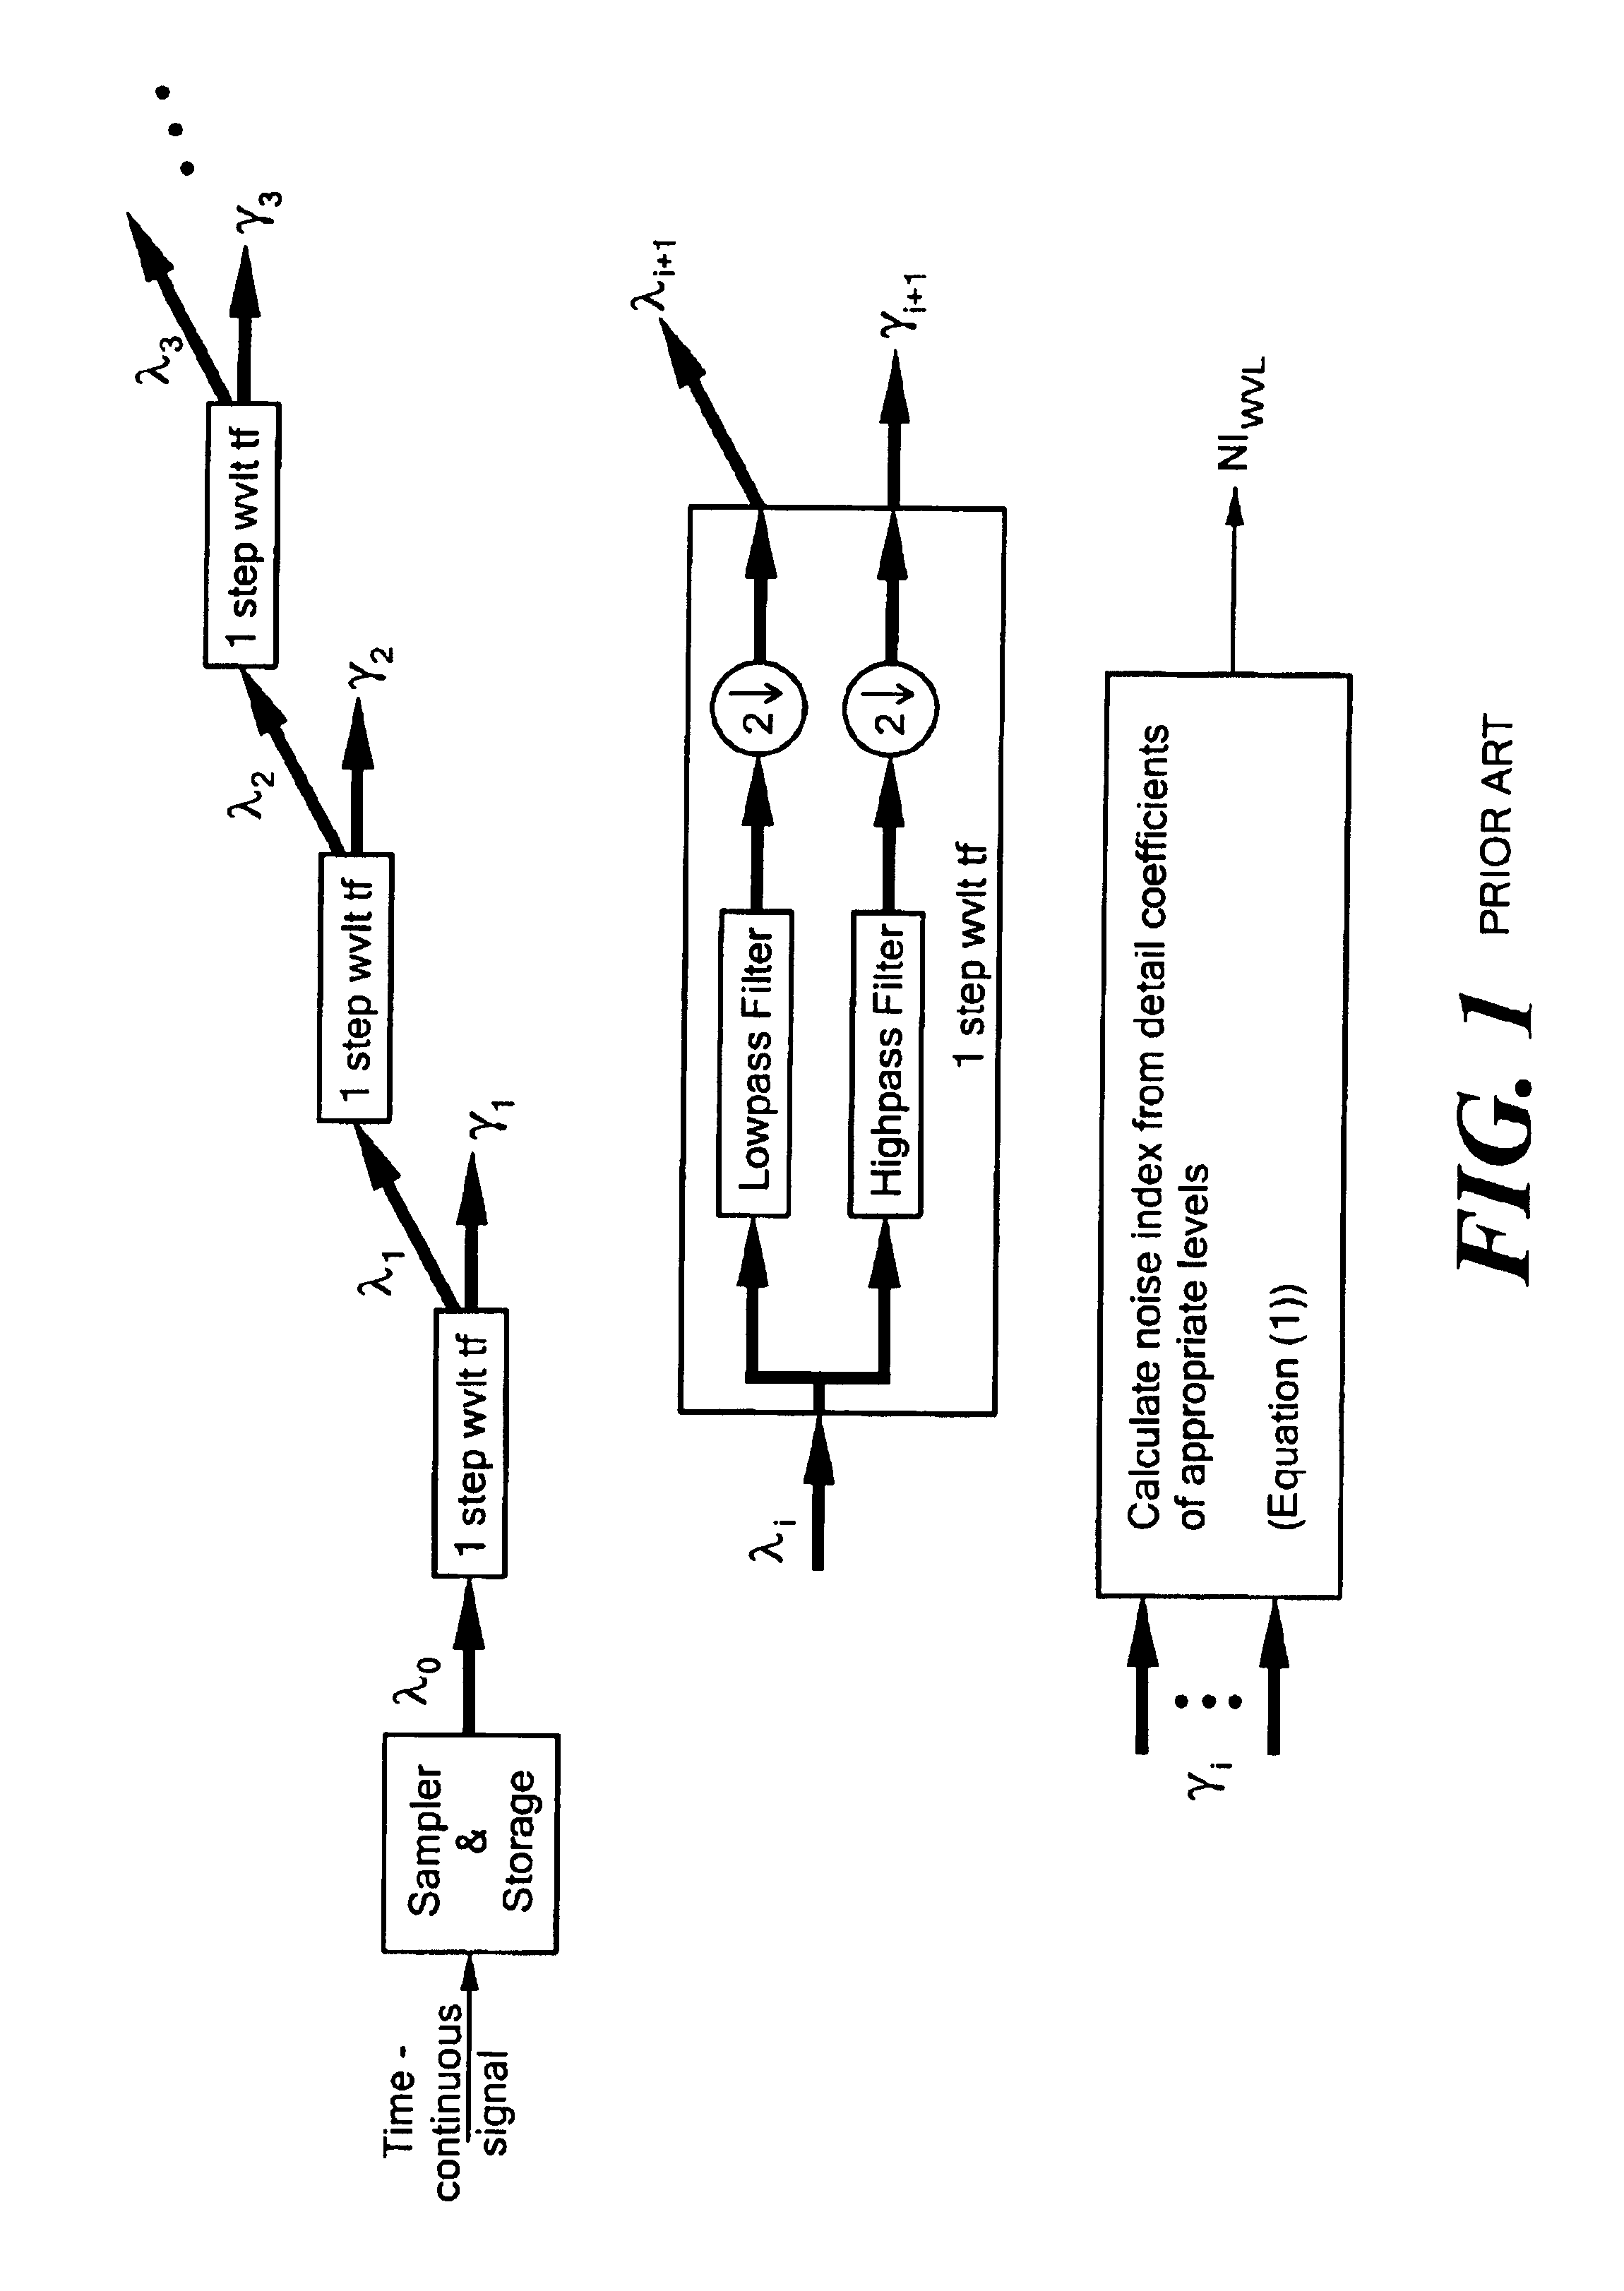 Method and system for assessing combustion noise in an internal combustion engine